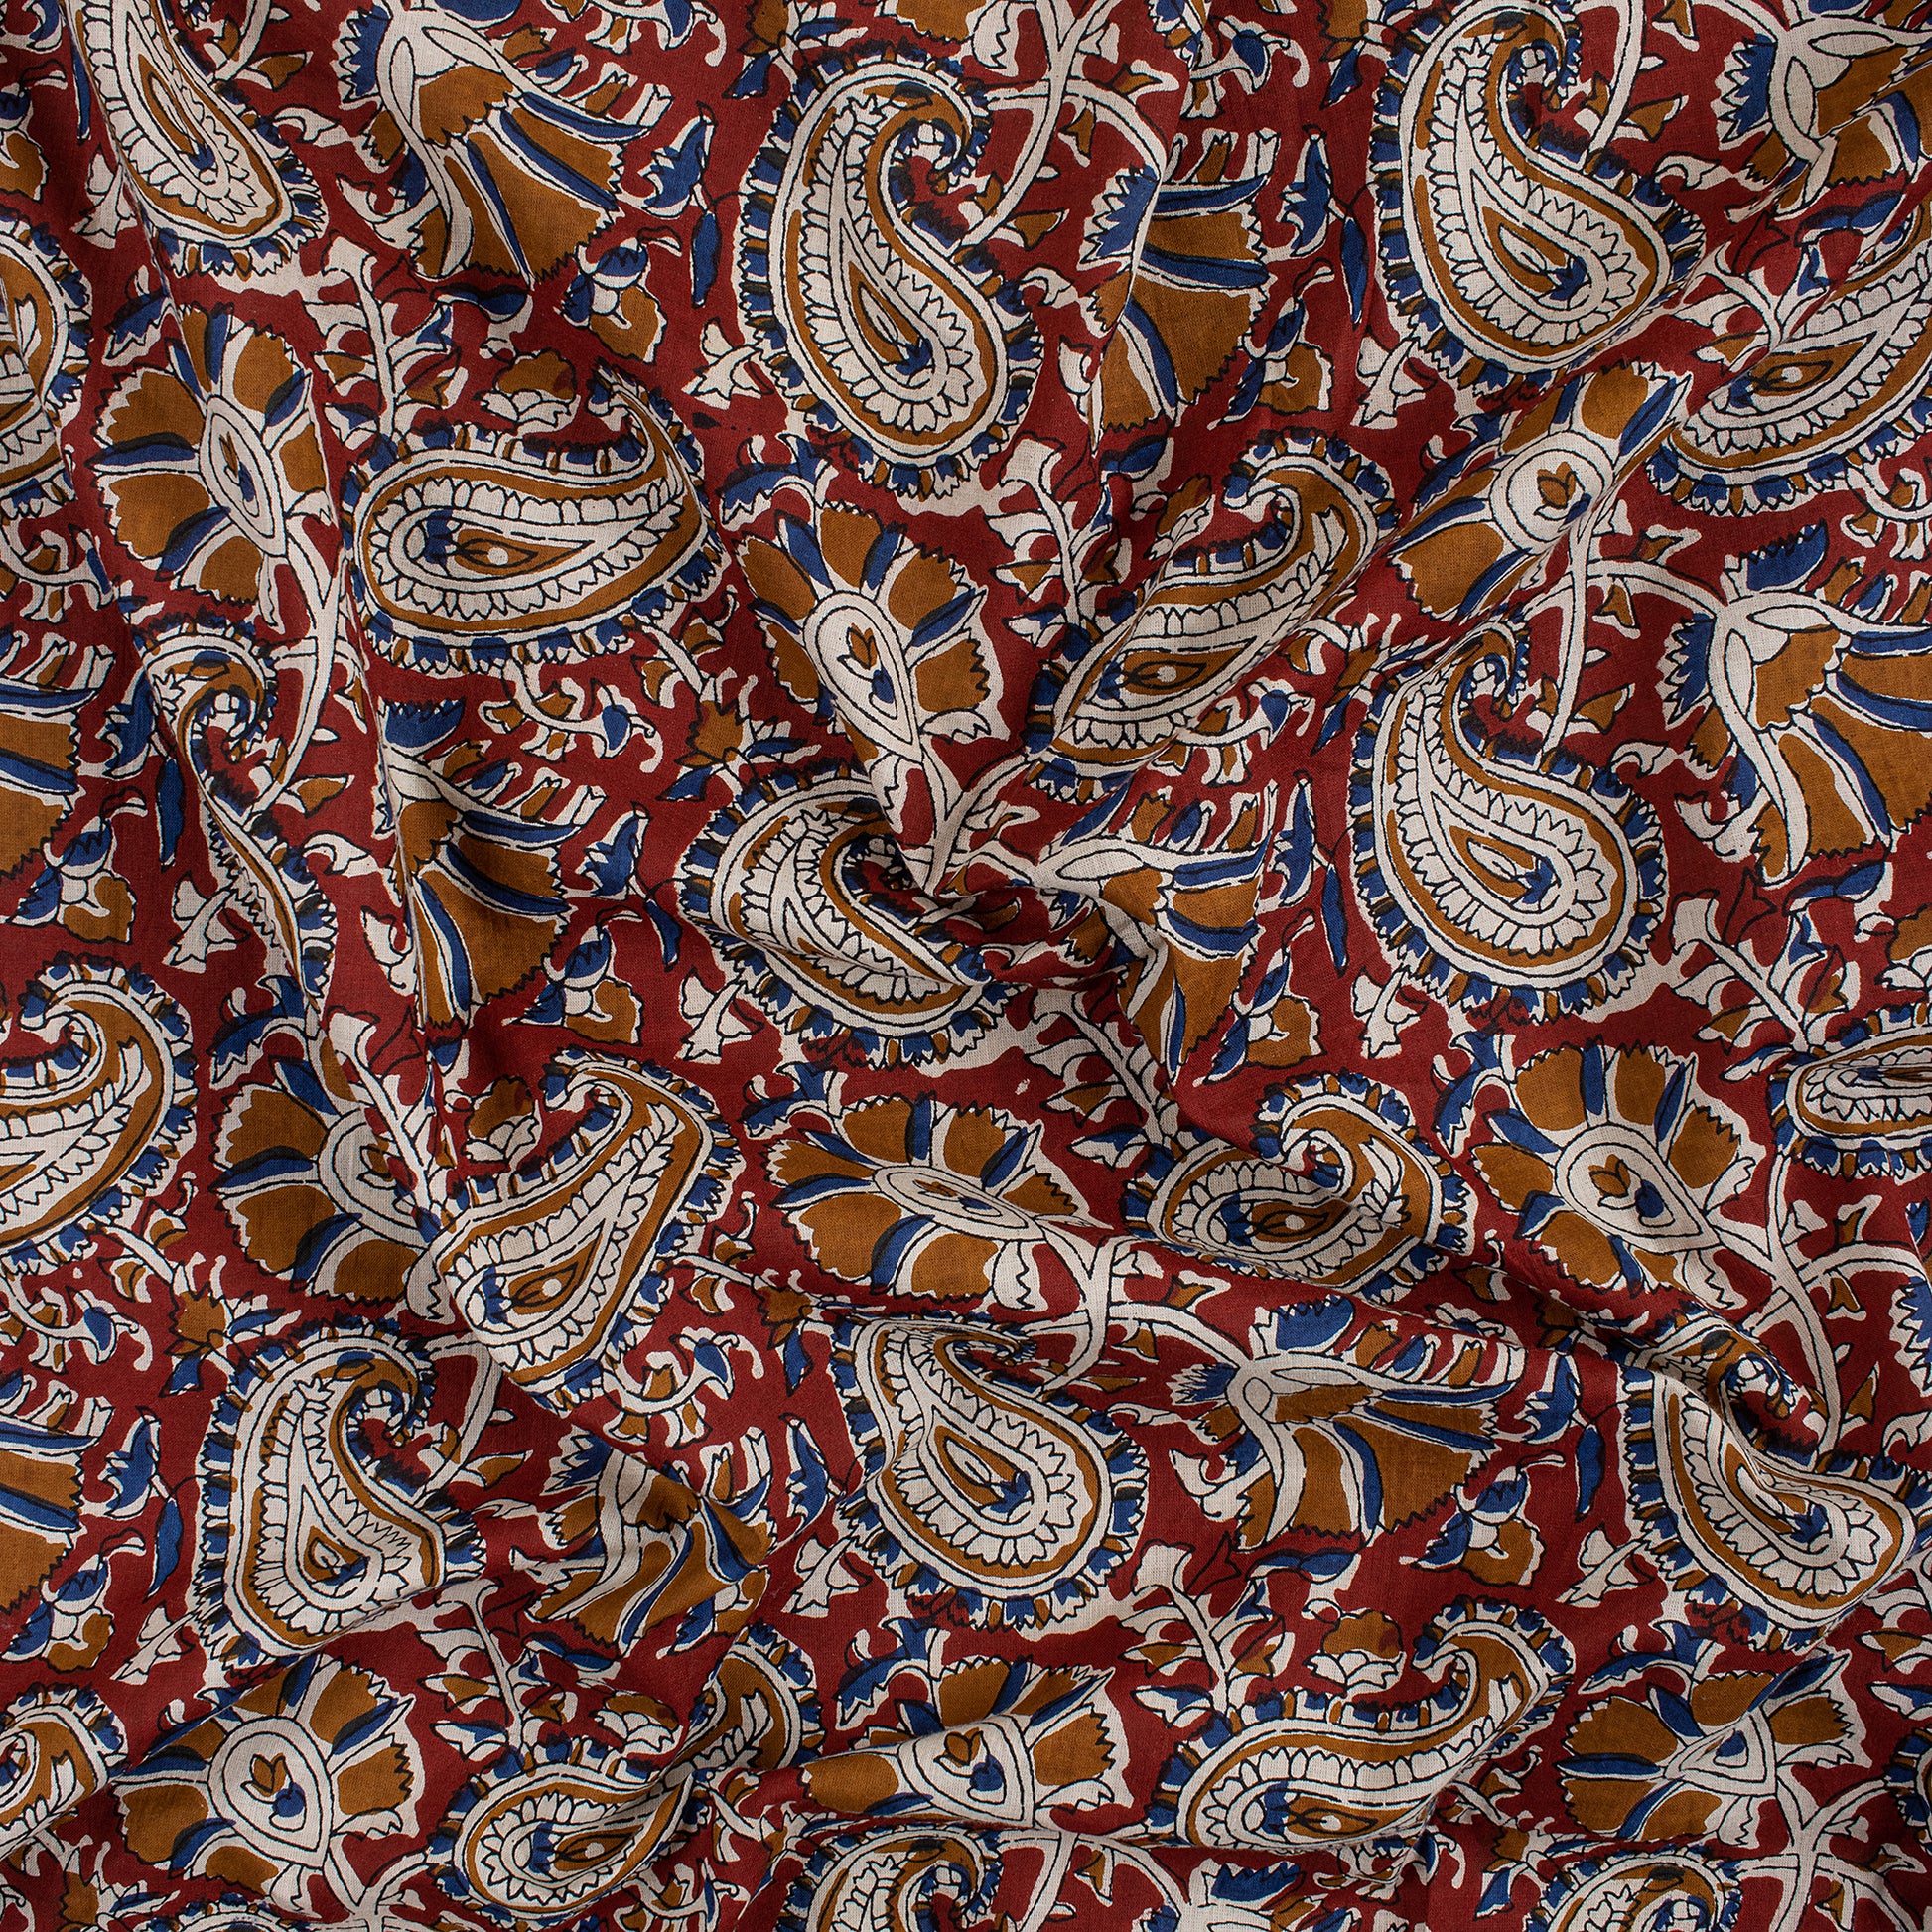 Brown Floral Cotton Paisley Bagru Print Fabric By The Yard Online